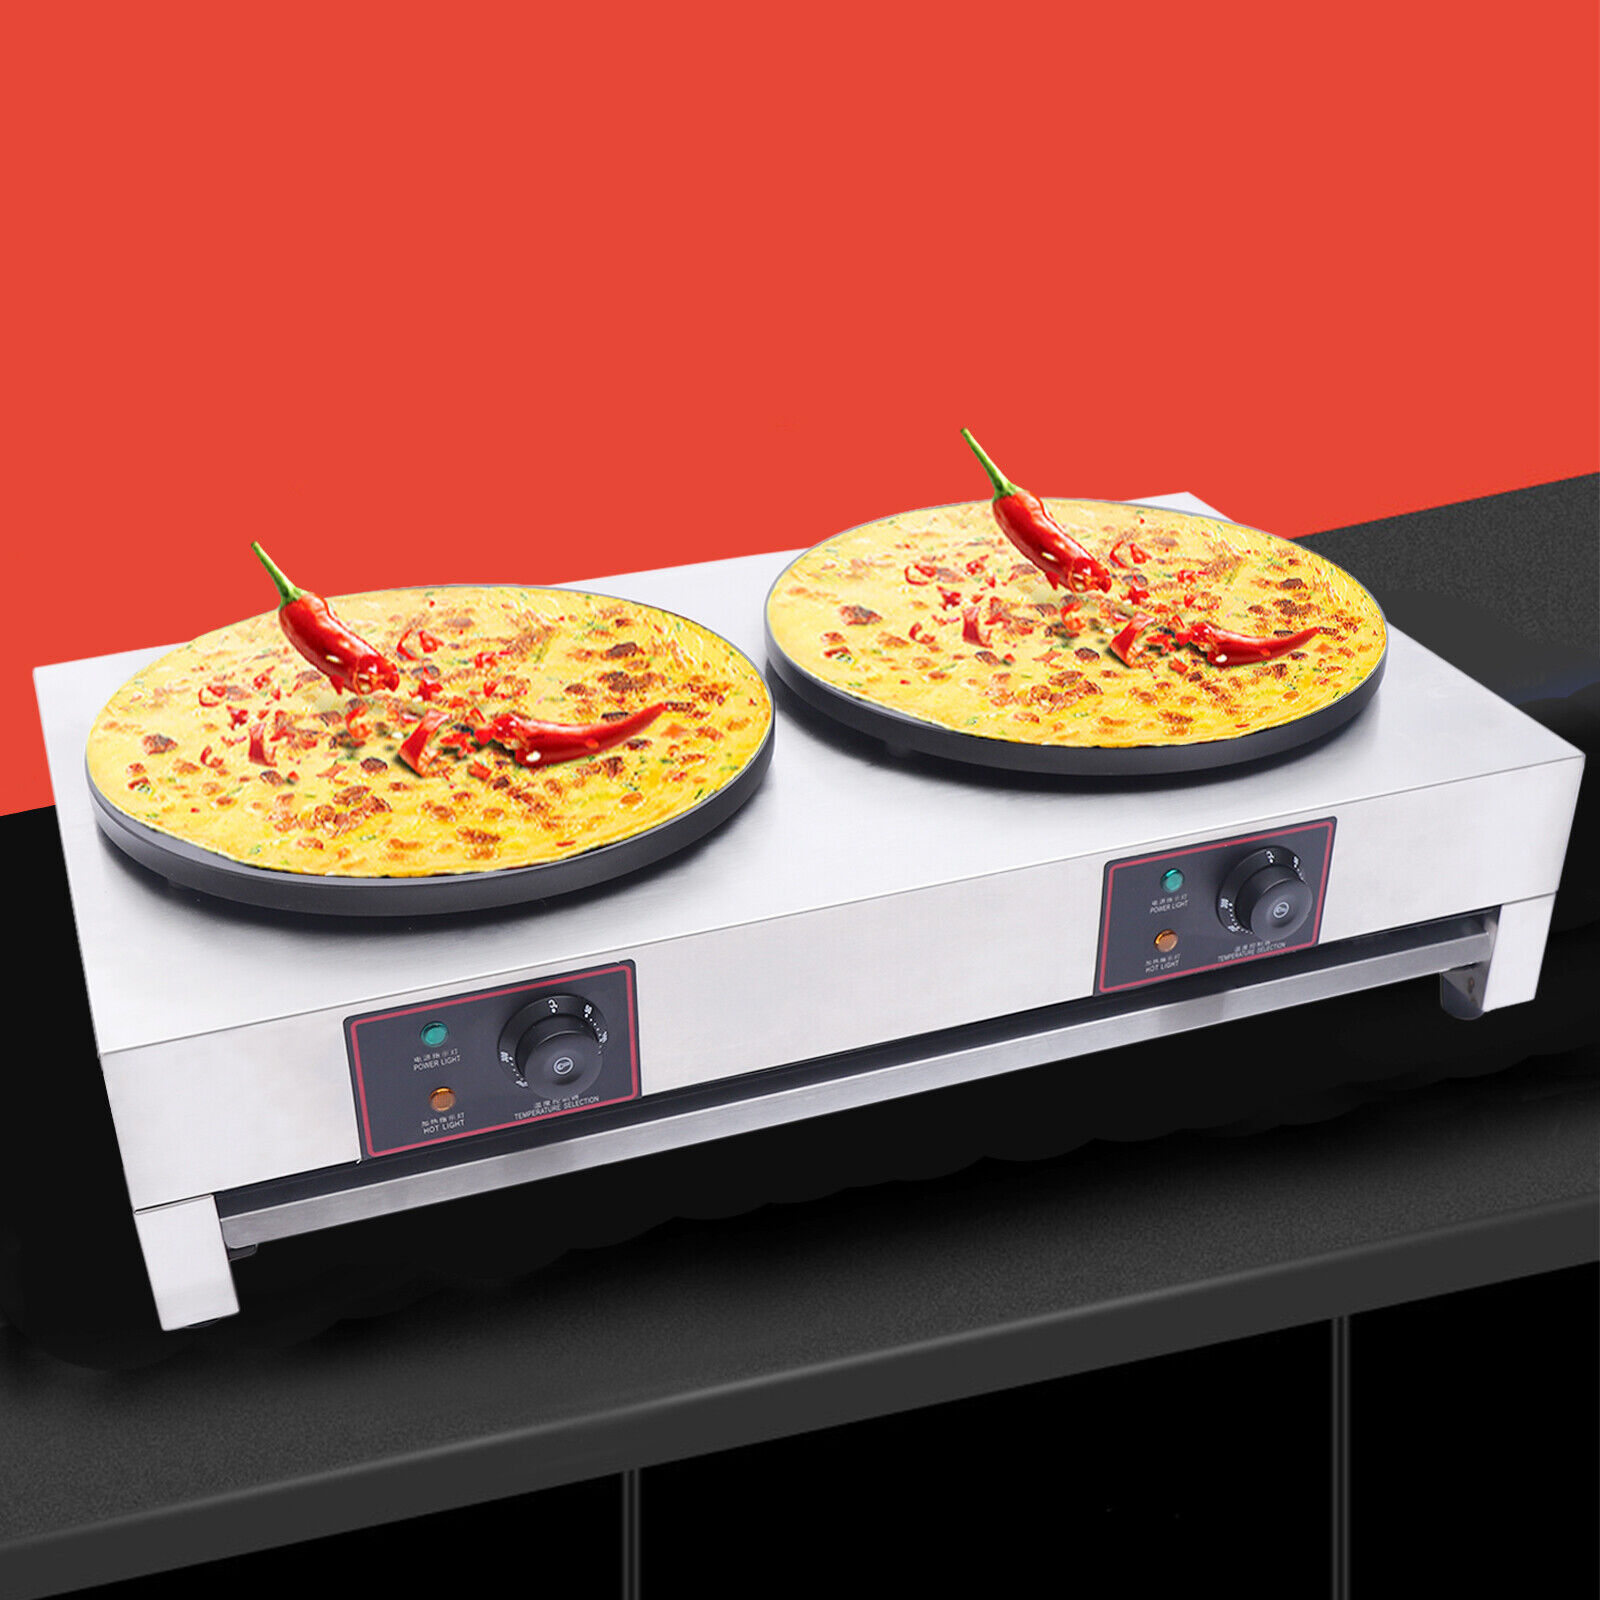 3kw+3kw 40cm 16" Commercial Double Pancake Maker Luxury Electric Crepe Unbranded Does Not Apply